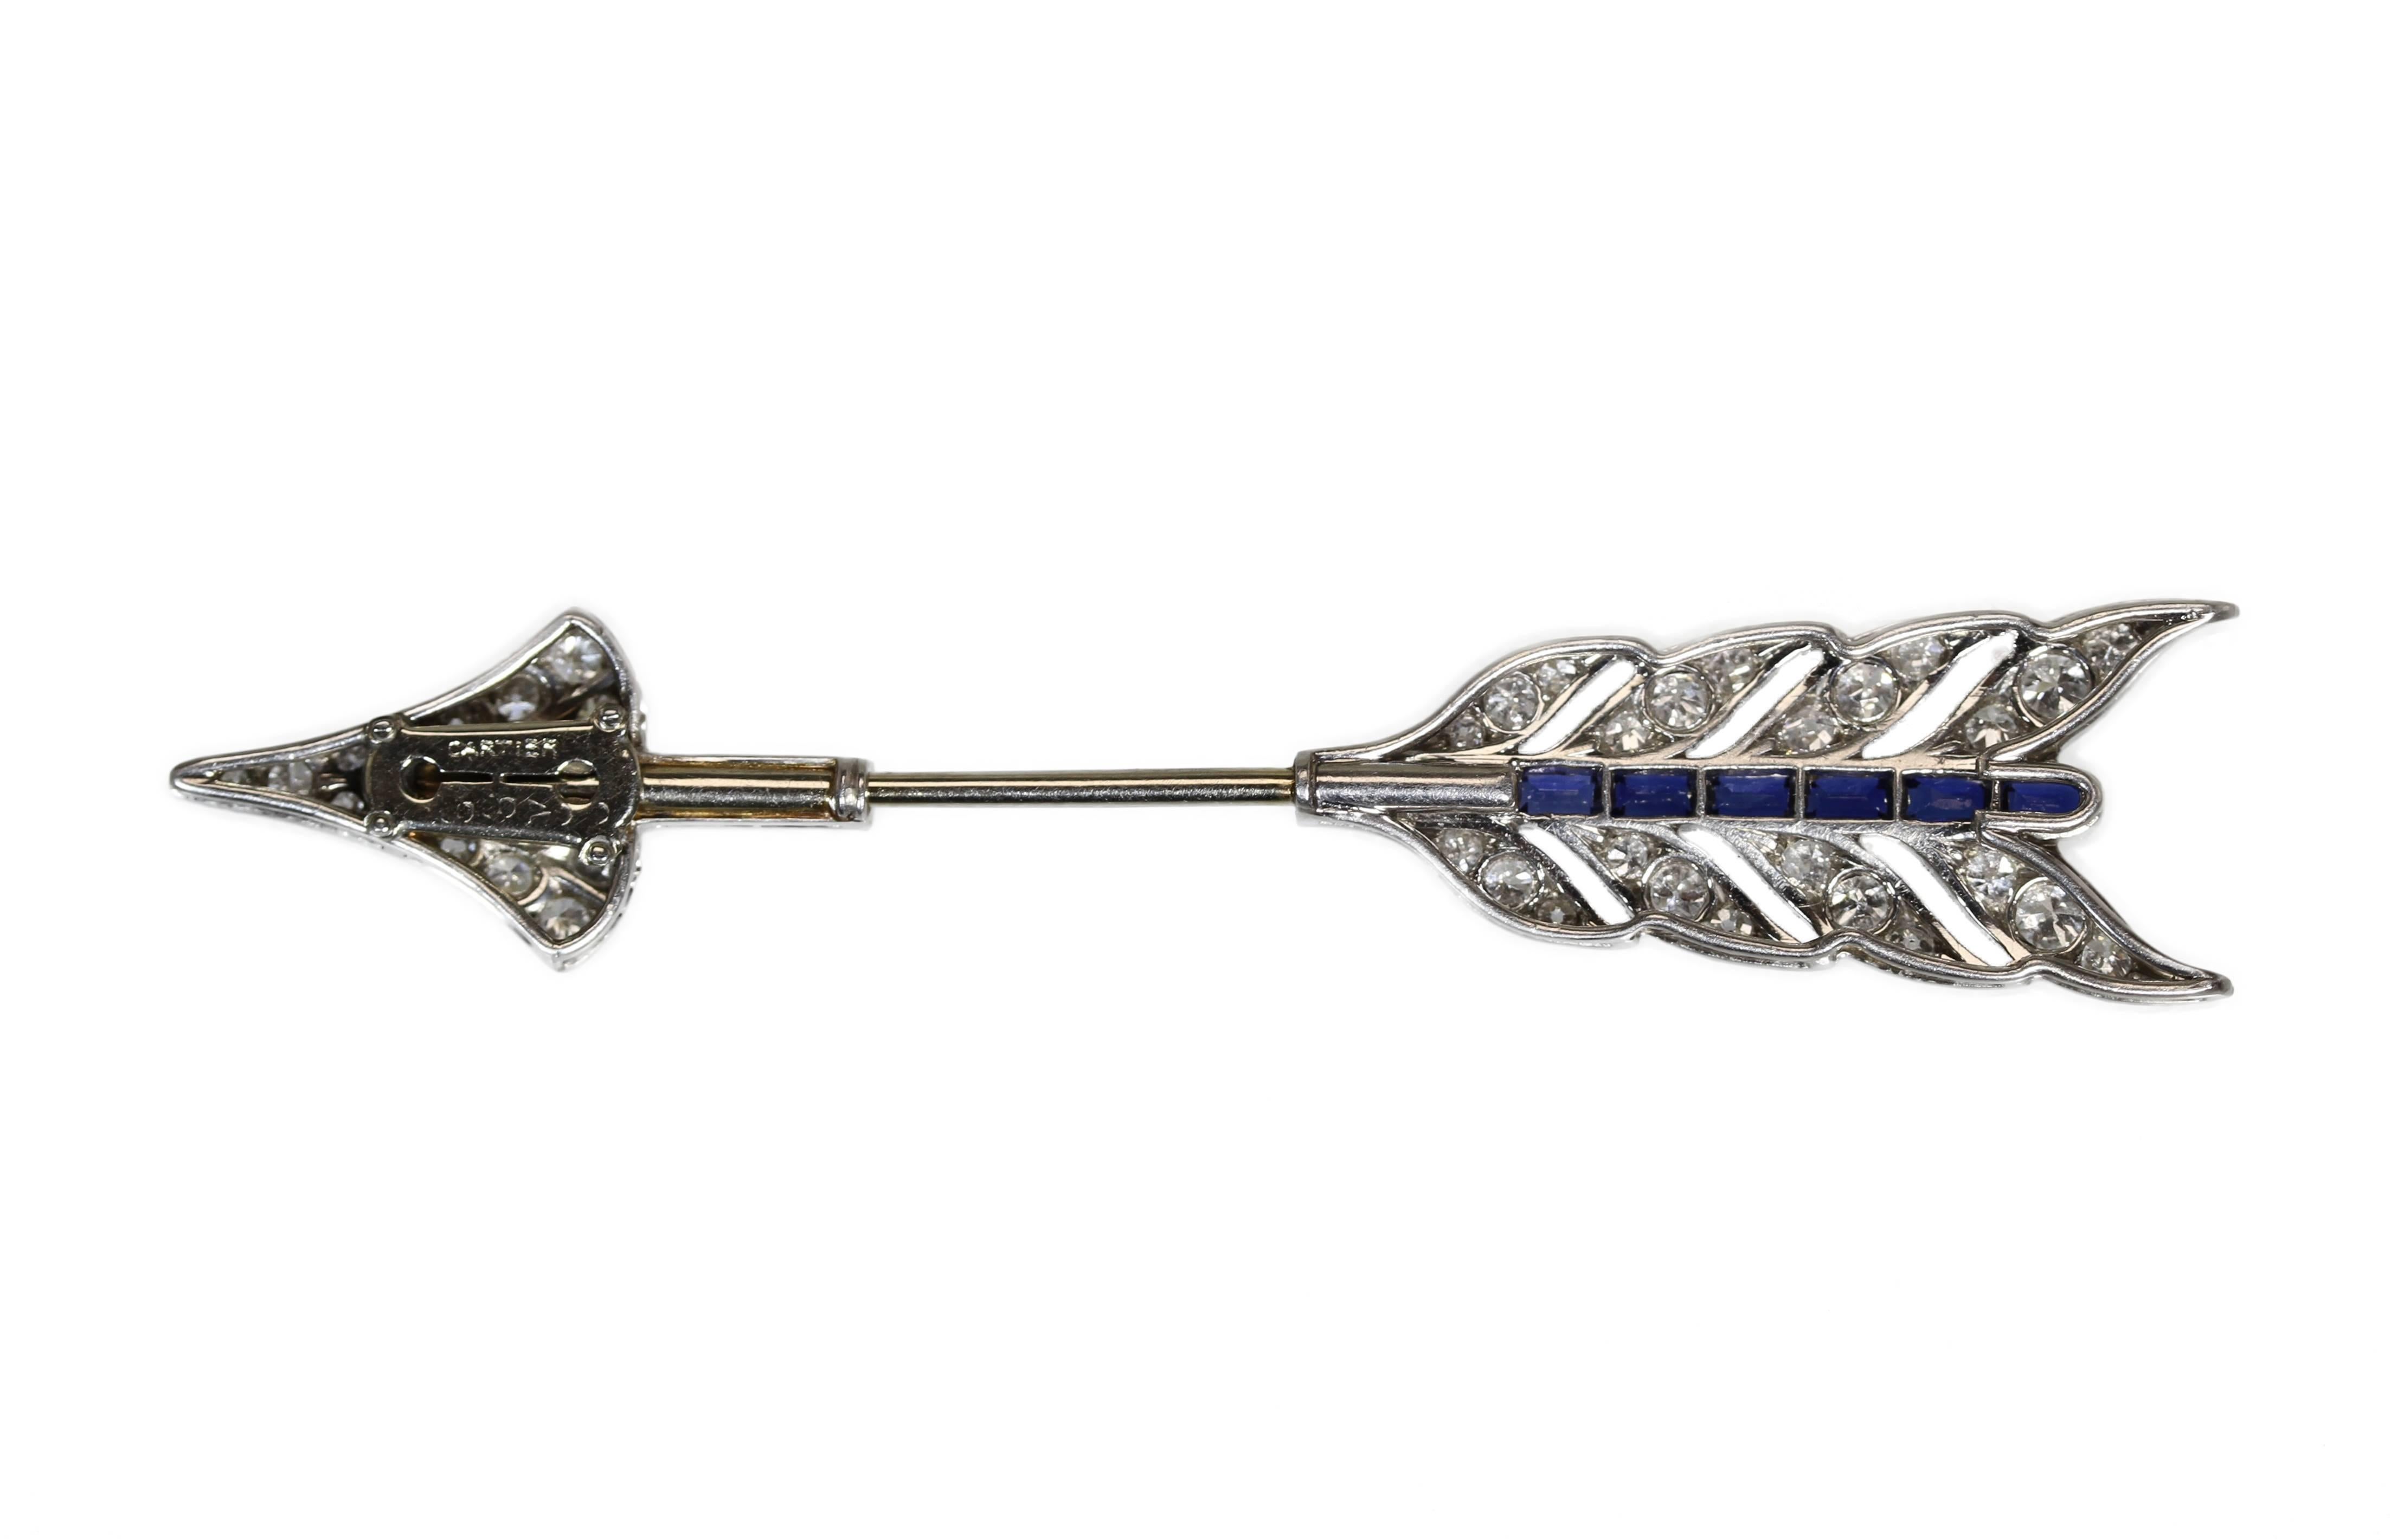 An Art Deco platinum, sapphire and diamond jabot brooch by Cartier, designed as an arrow set with 18 old European-cut diamonds weighing approximately 0.75 carat, and 24 single-cut diamonds weighing approximately 0.50 carat, accented by by 11